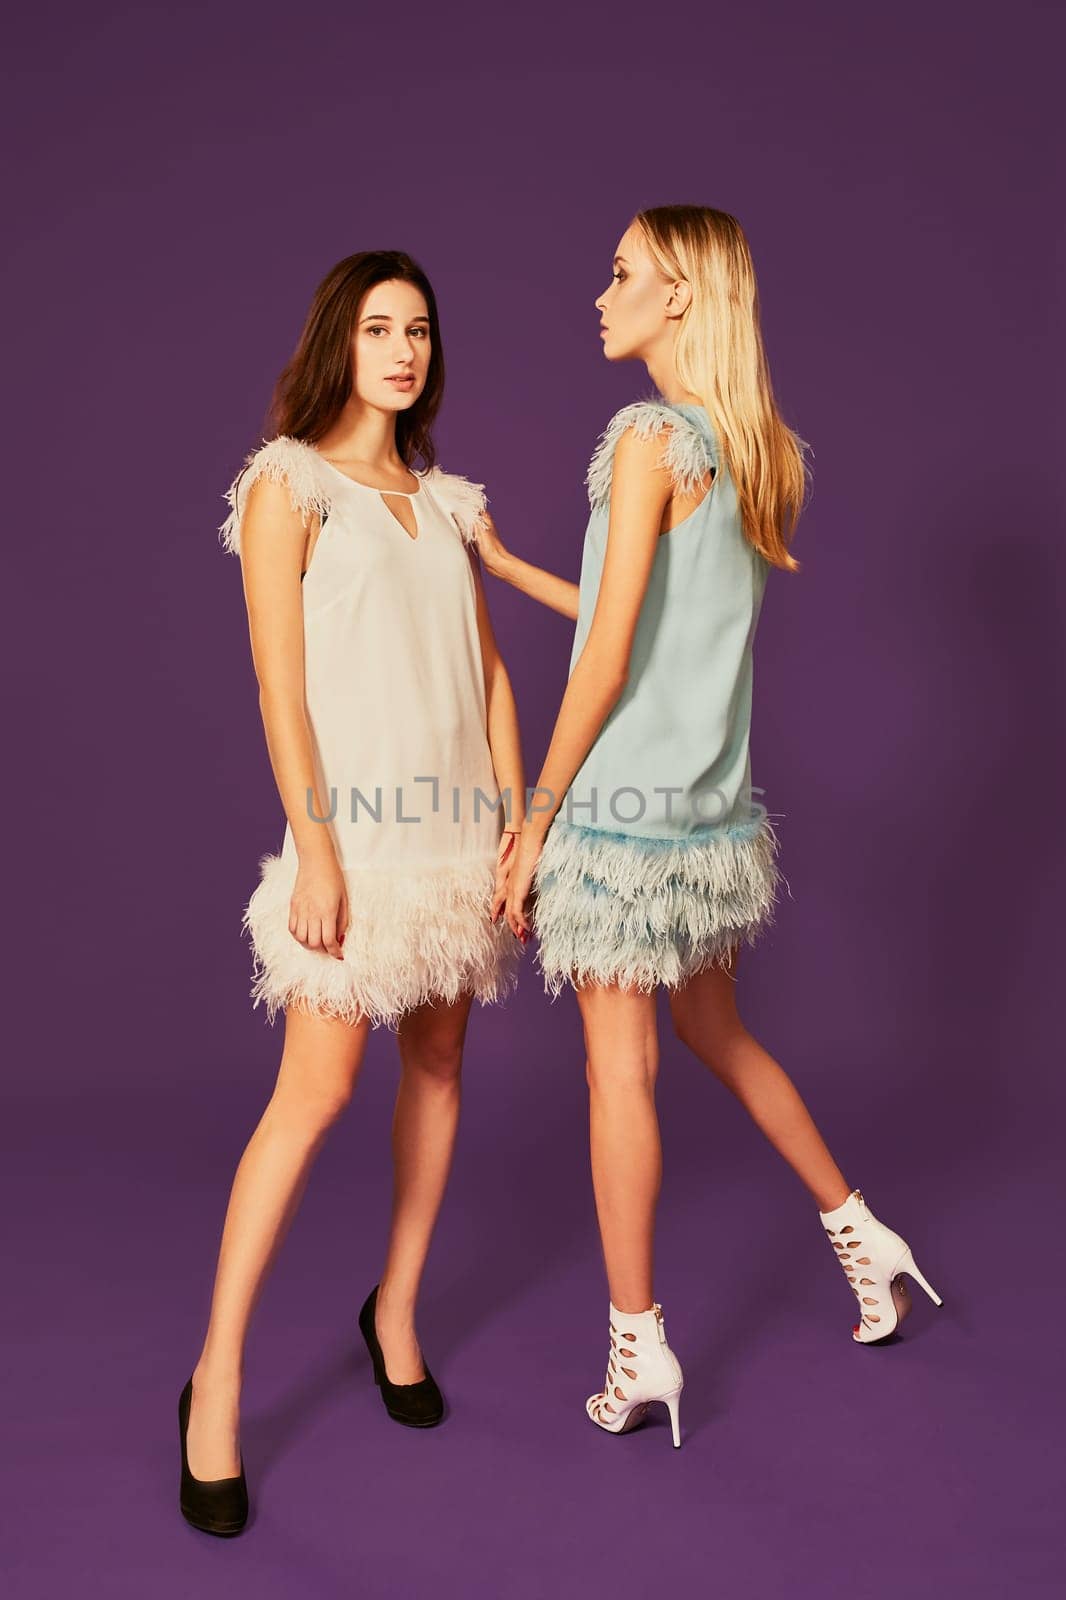 Studio fashion portrait of two elegant young women in cocktail light dresses posing in studio. Blonde and brunette hold hands, Black and white shoes